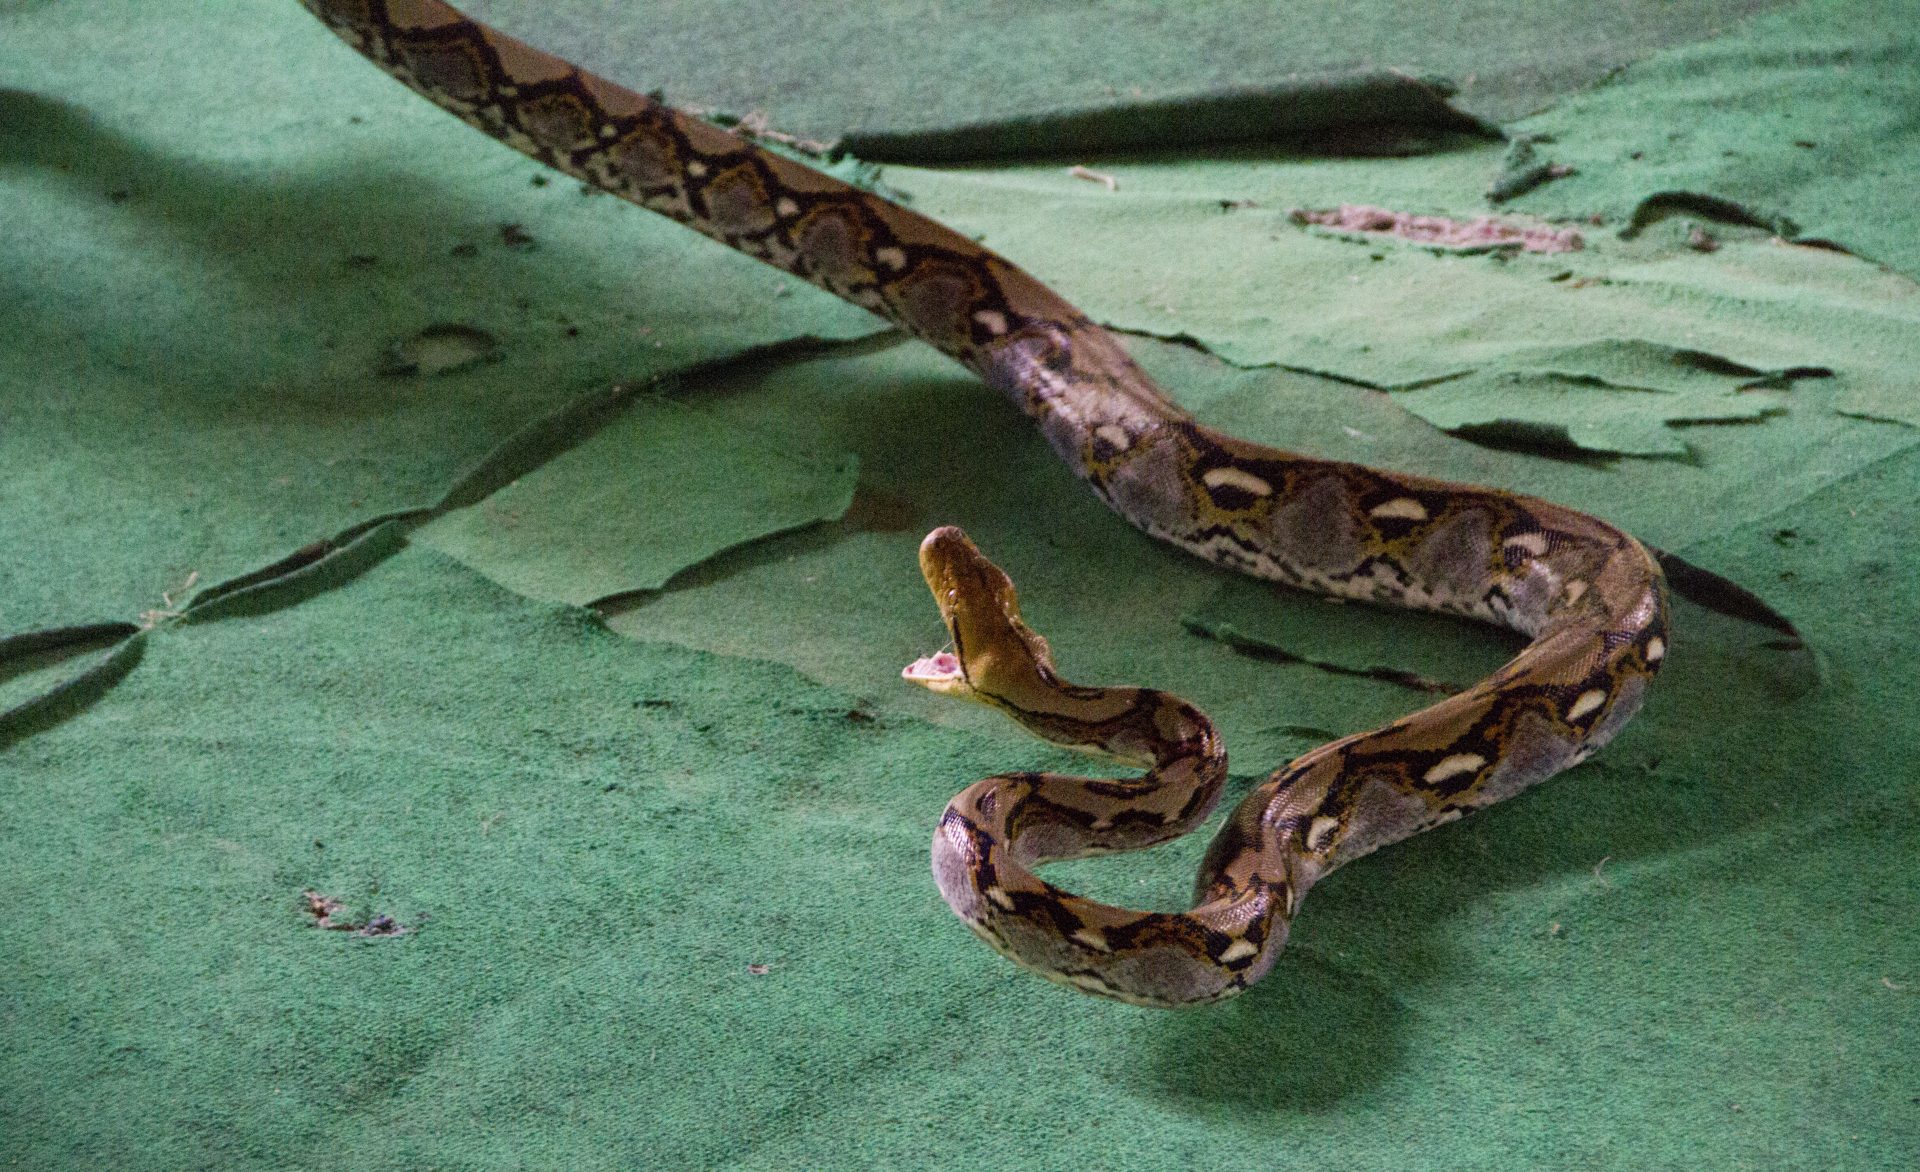 Two-year-old snake bites to death after reptile bites its lip 